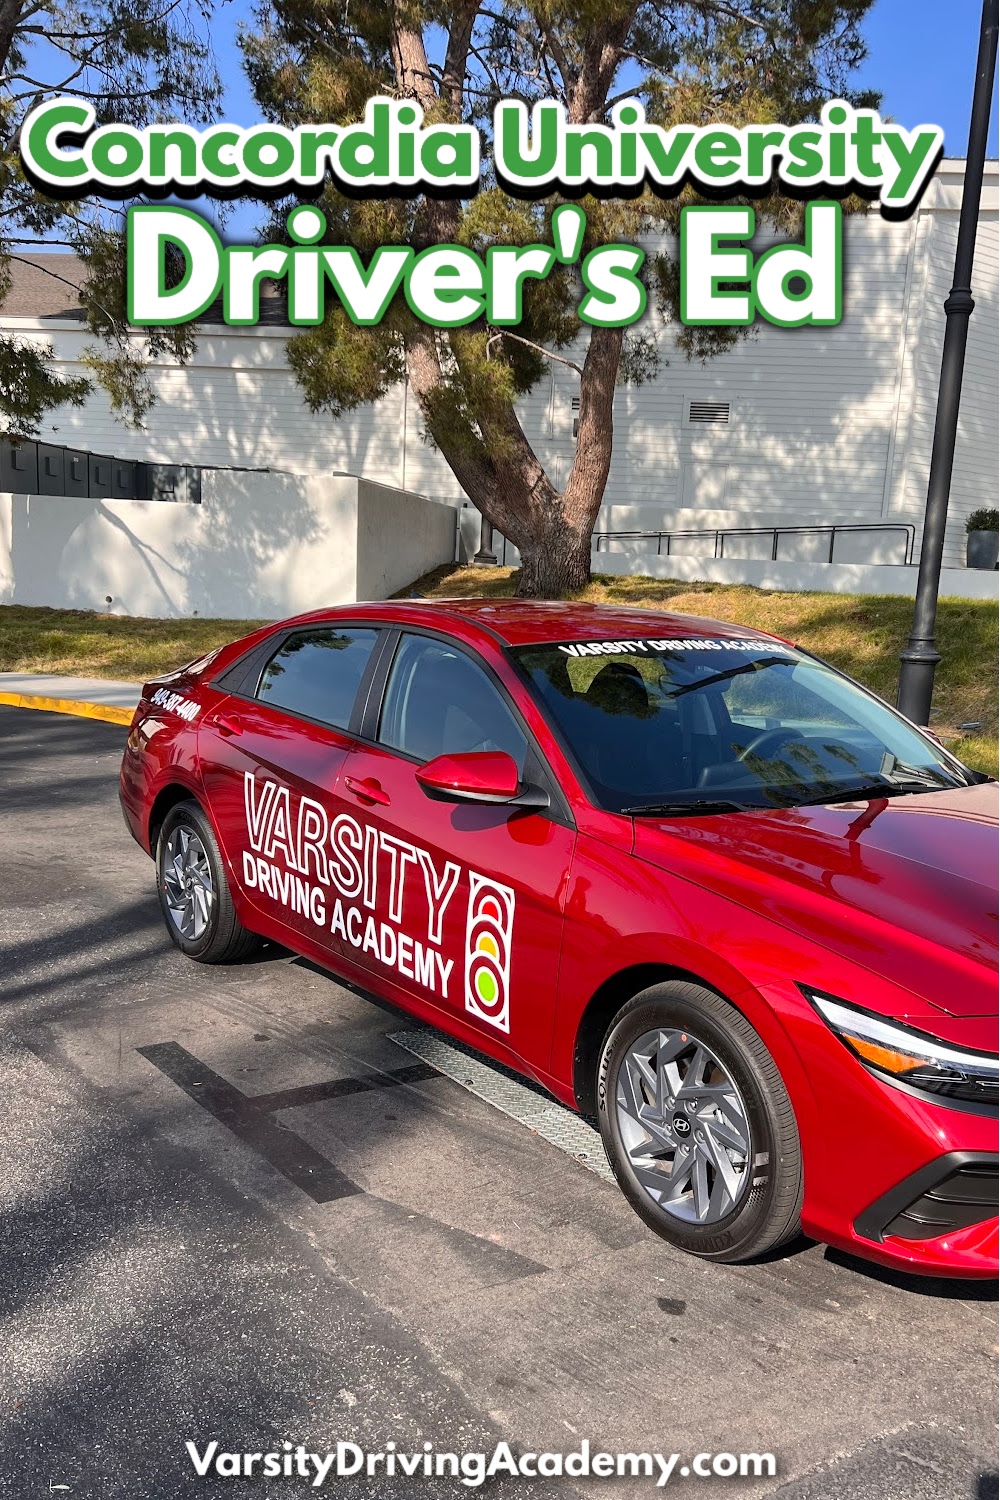 The best Concordia University driver's ed can be found at Varsity Driving Academy with a focus on defensive driving and getting a license.